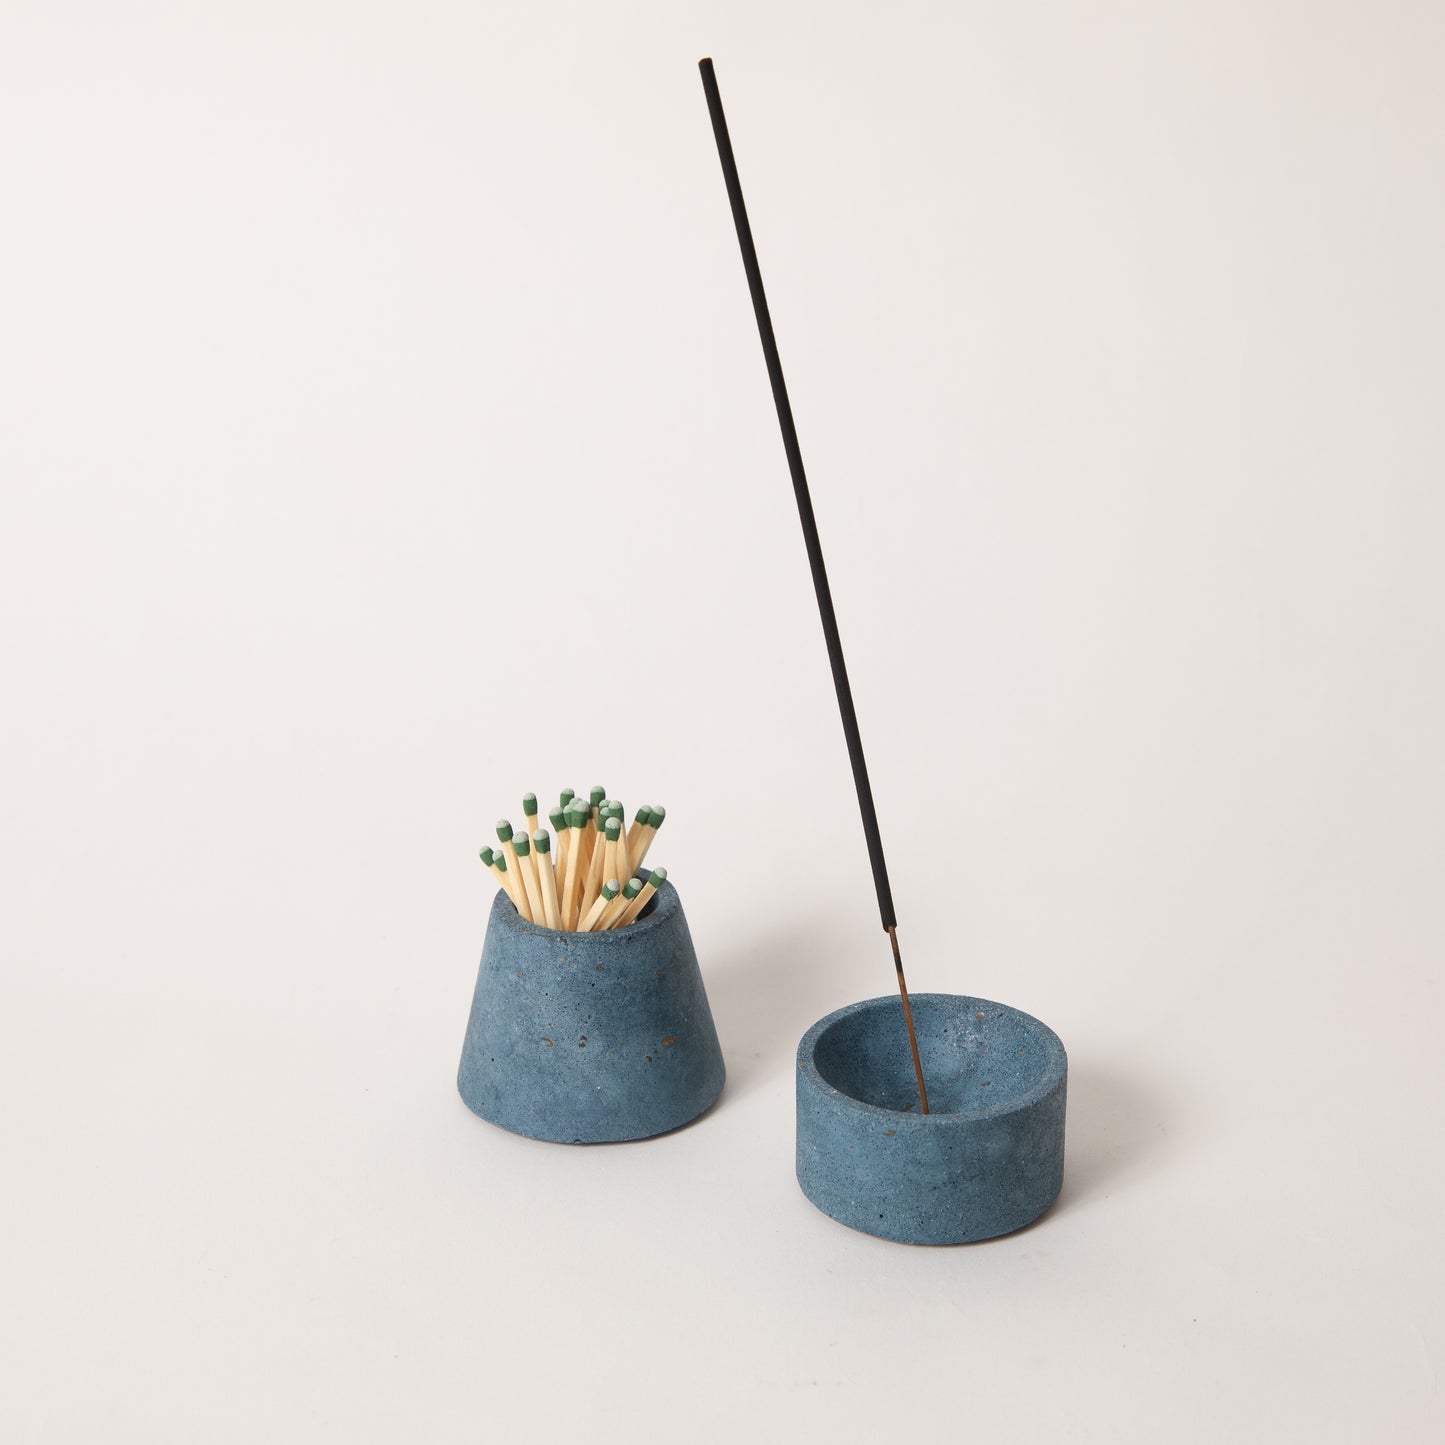 Cobalt terrazzo matchstick & incense holder set, styled with strike-anywhere matches & an incense stick.